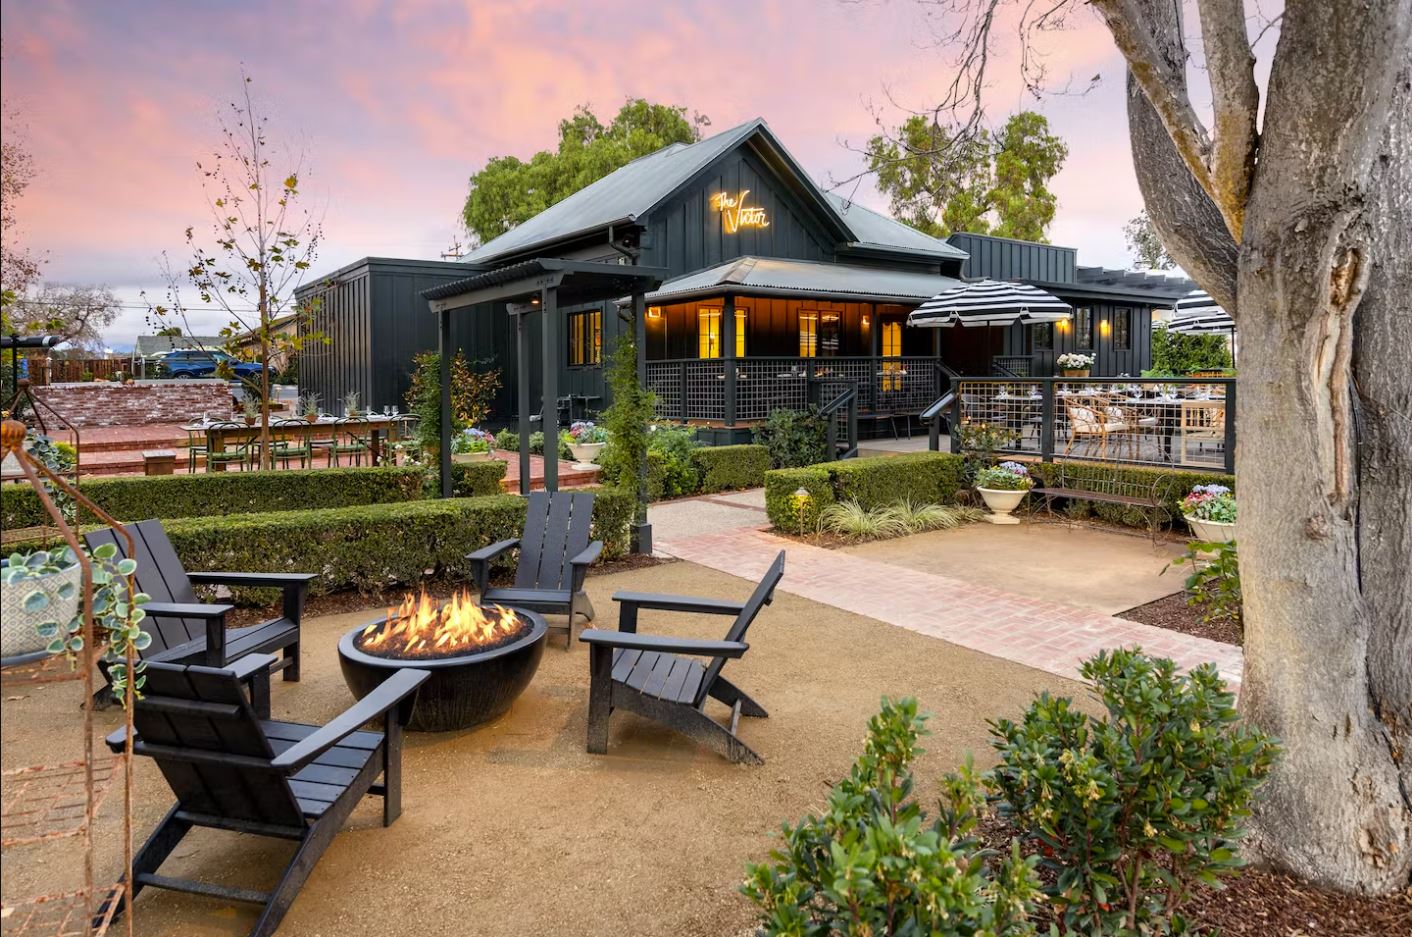 Photo of exterior of the Victor website with fire pit and lounge chairs